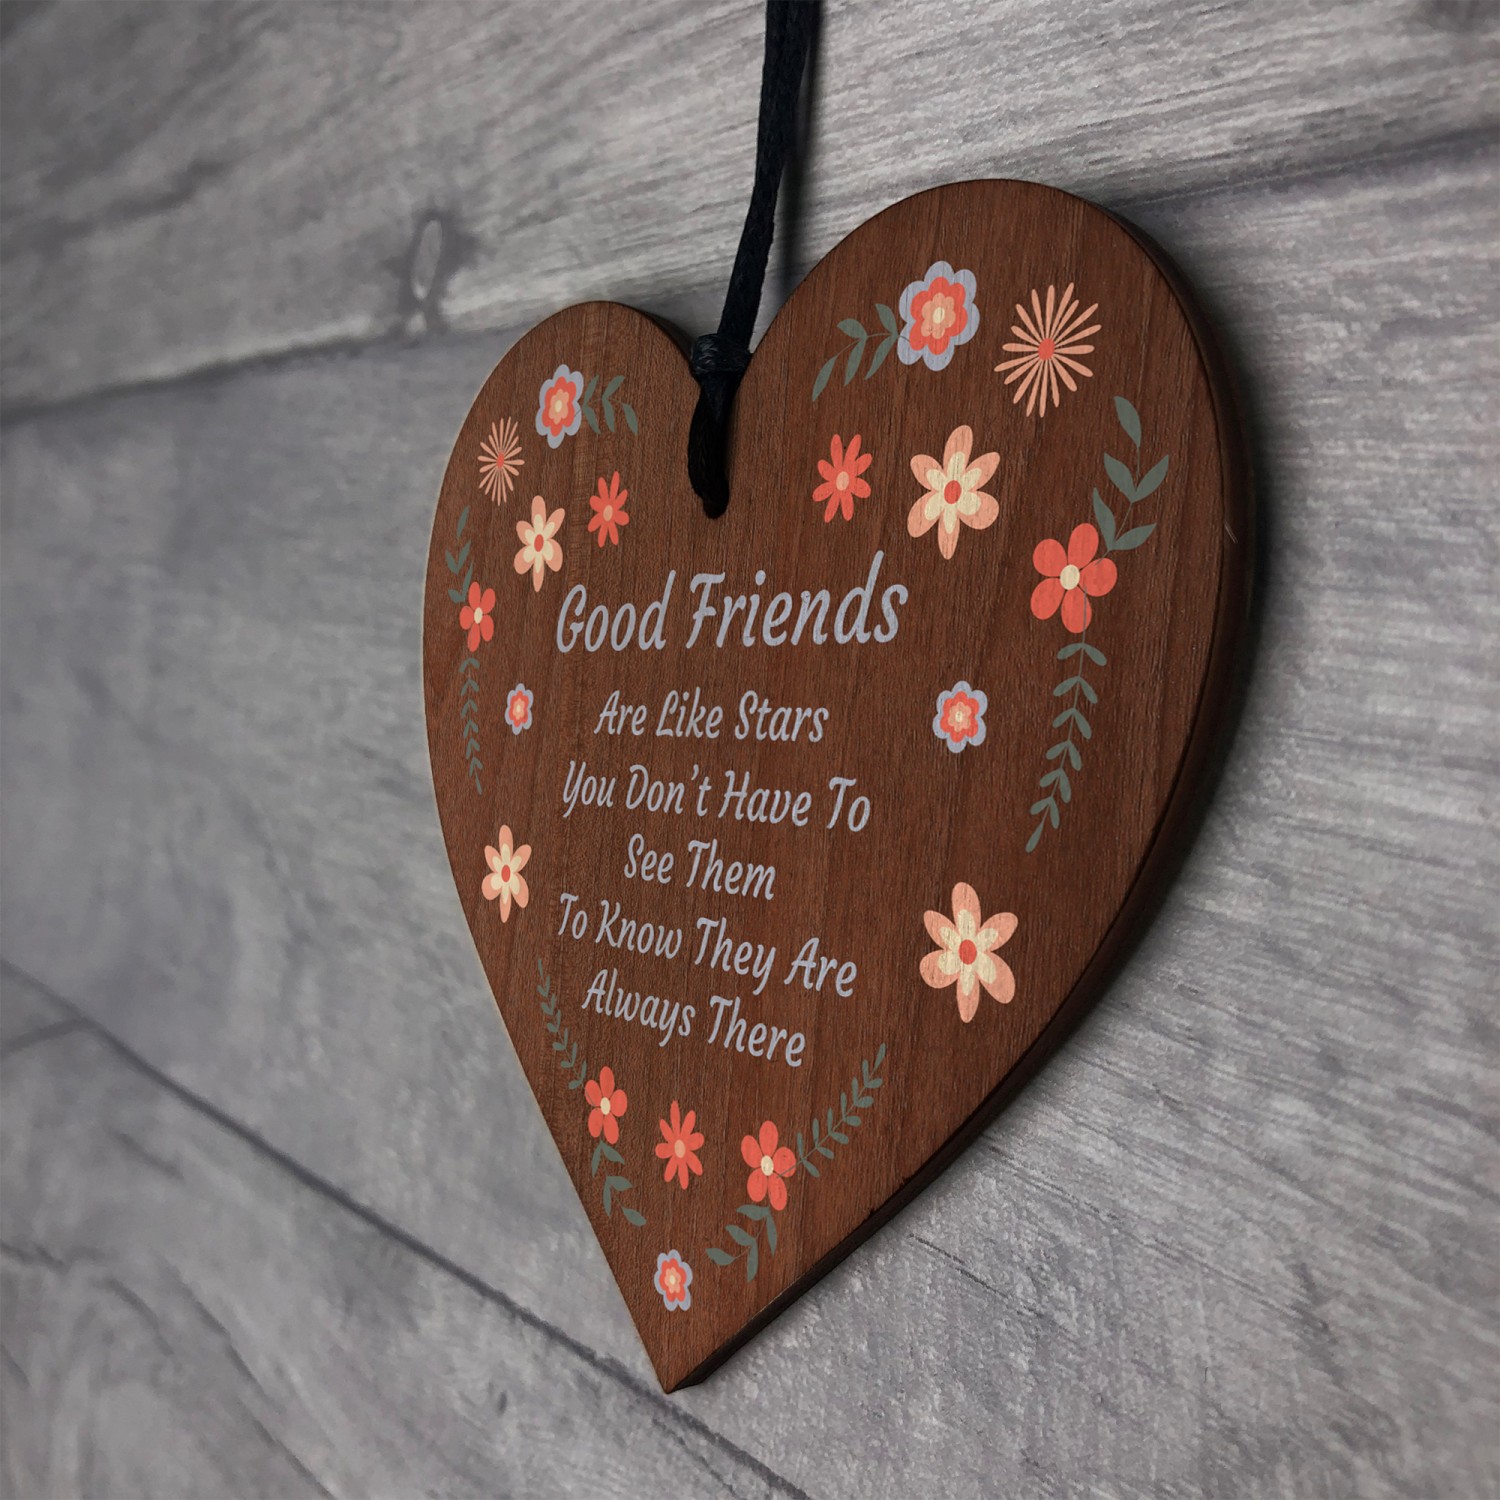 50 Sentimental Gifts For Best Friends That Are Thoughtful | Sentimental  gifts, Meaningful friendship gifts, Meaningful gifts